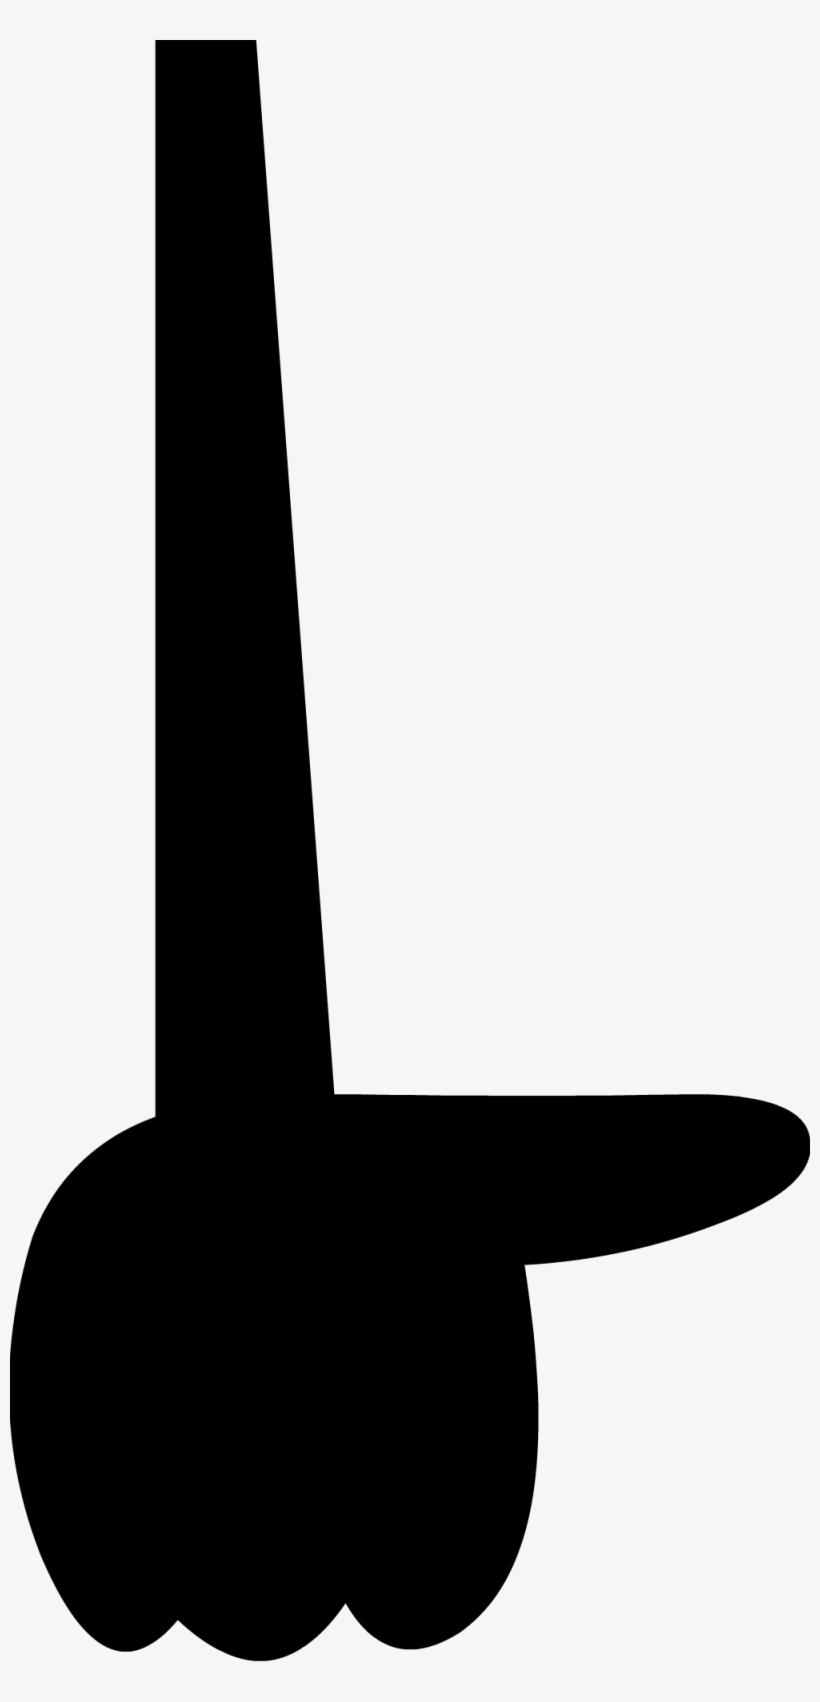 Thumbs Up Straight Arm - Bfdi Arms Thumbs Up, transparent png #295848